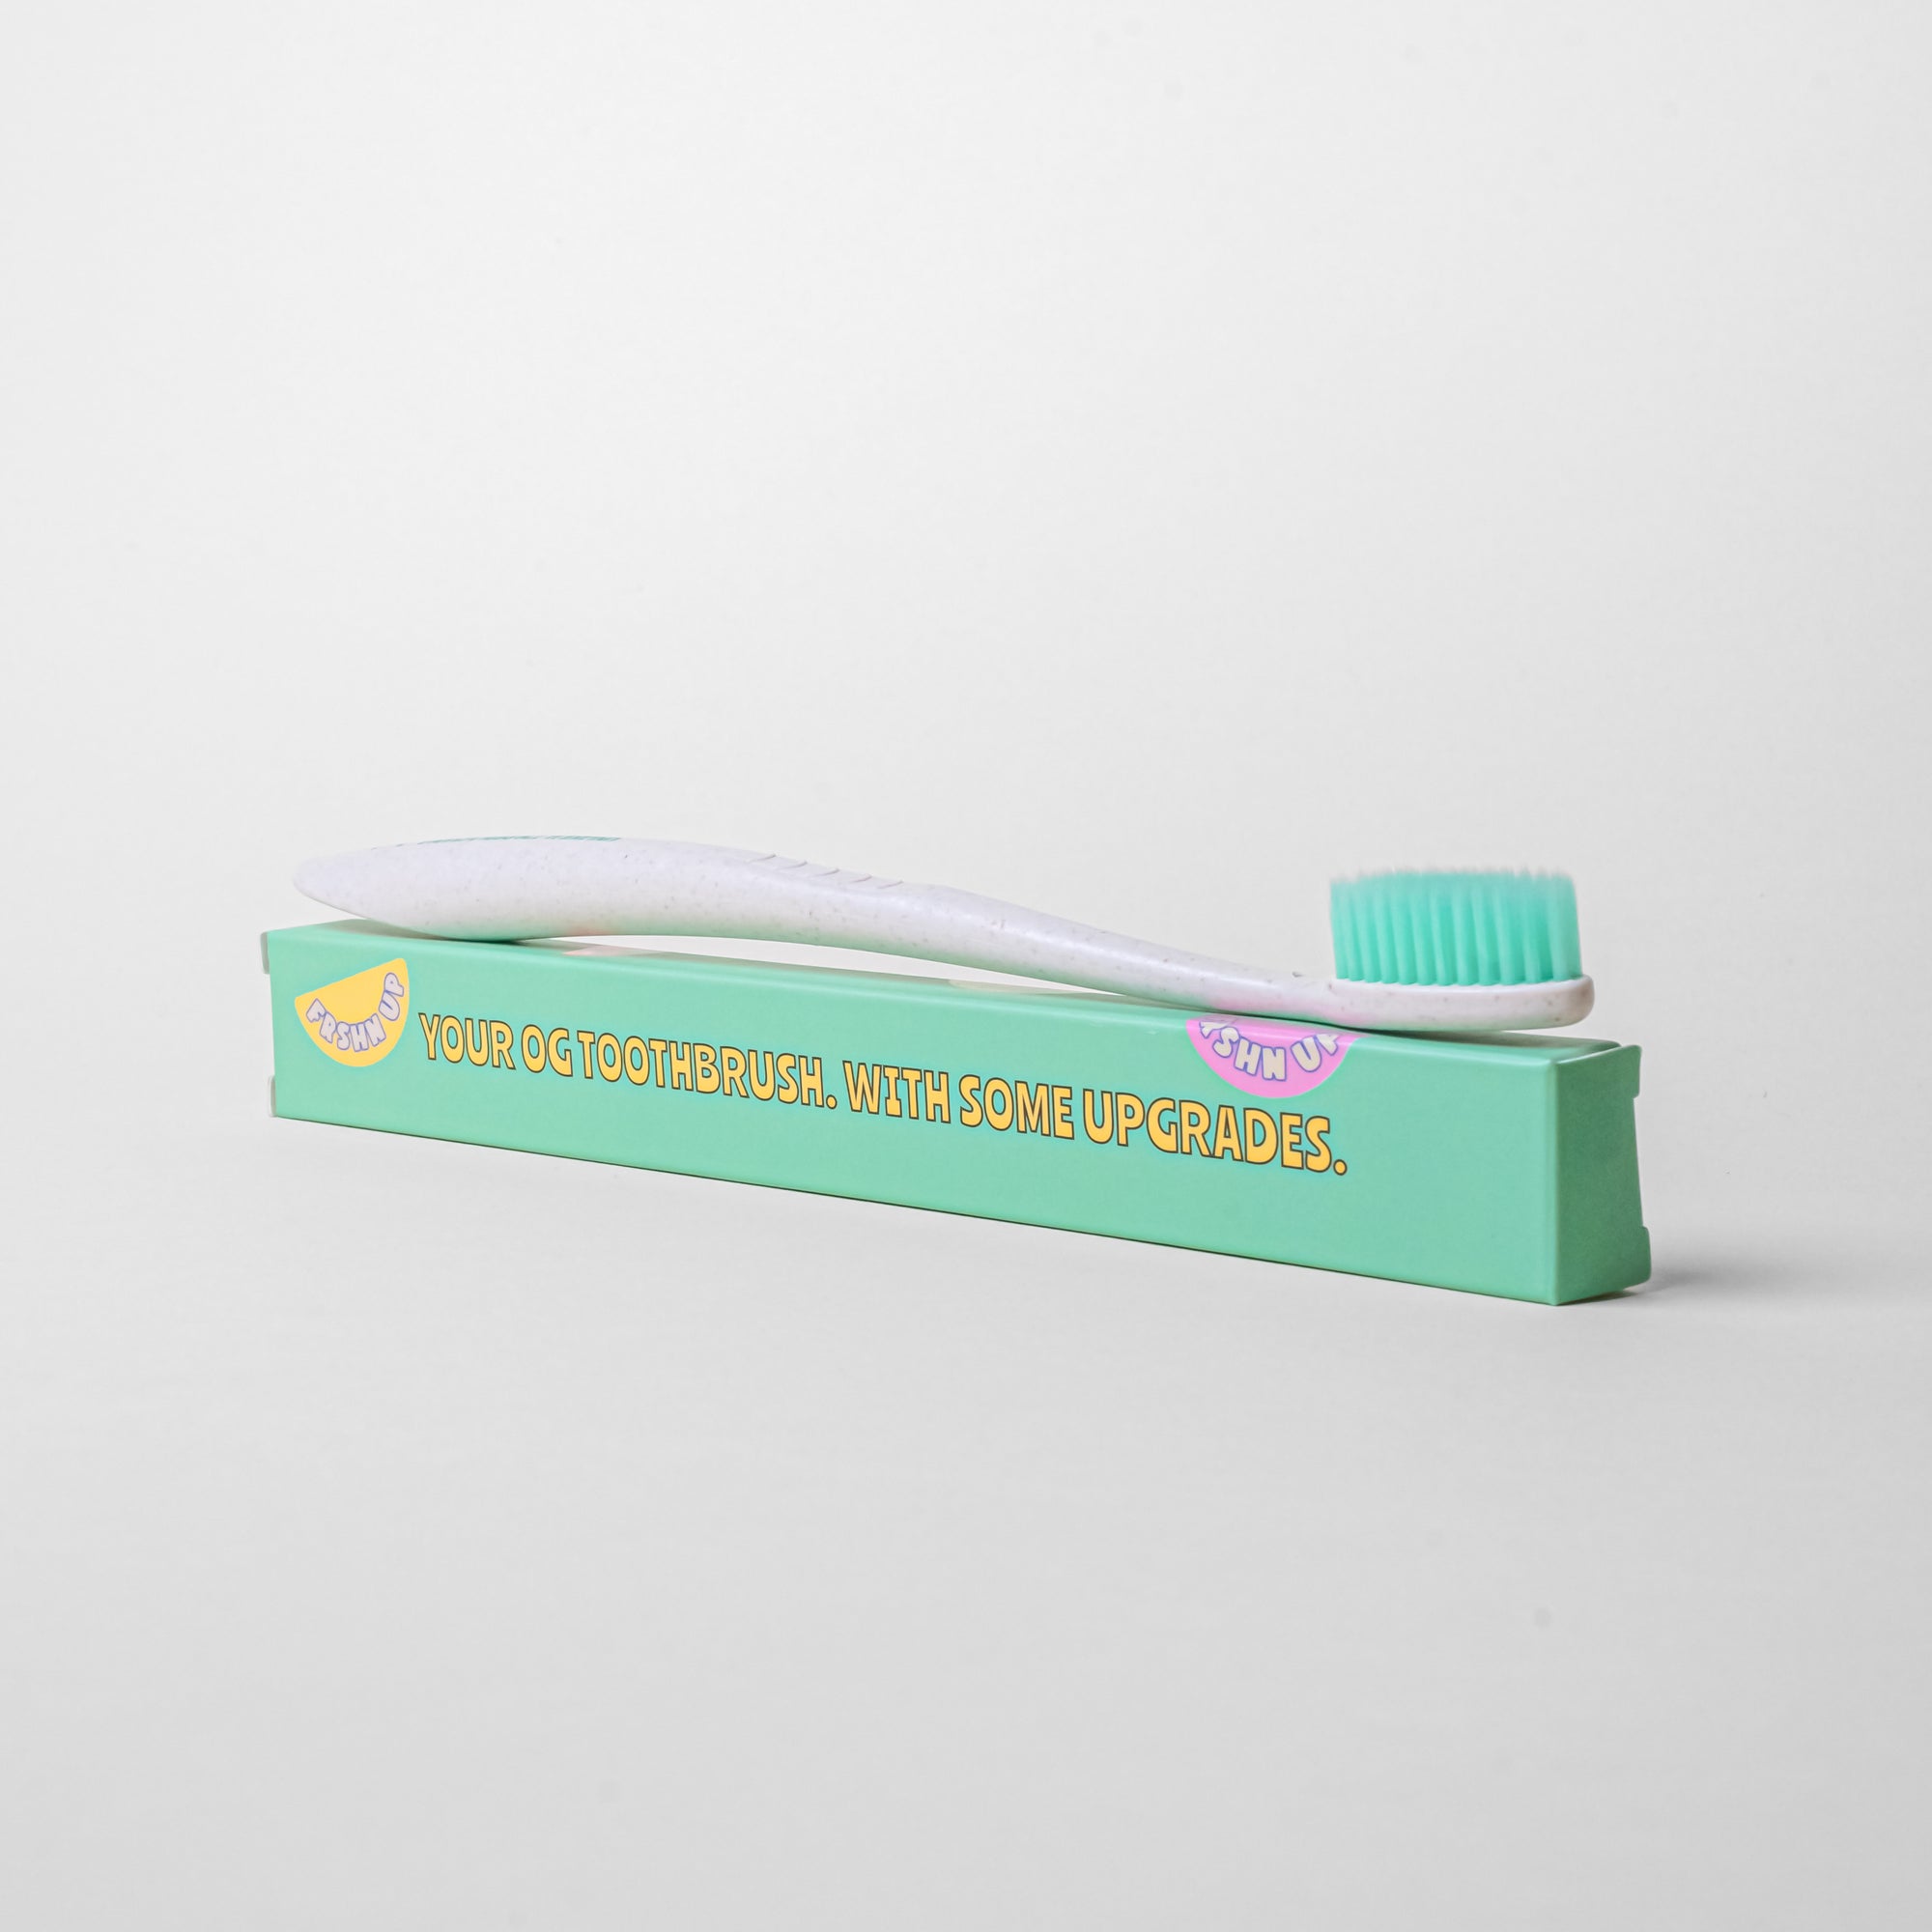 An OG Toothbrush in a box by FRSHN UP on a white surface.